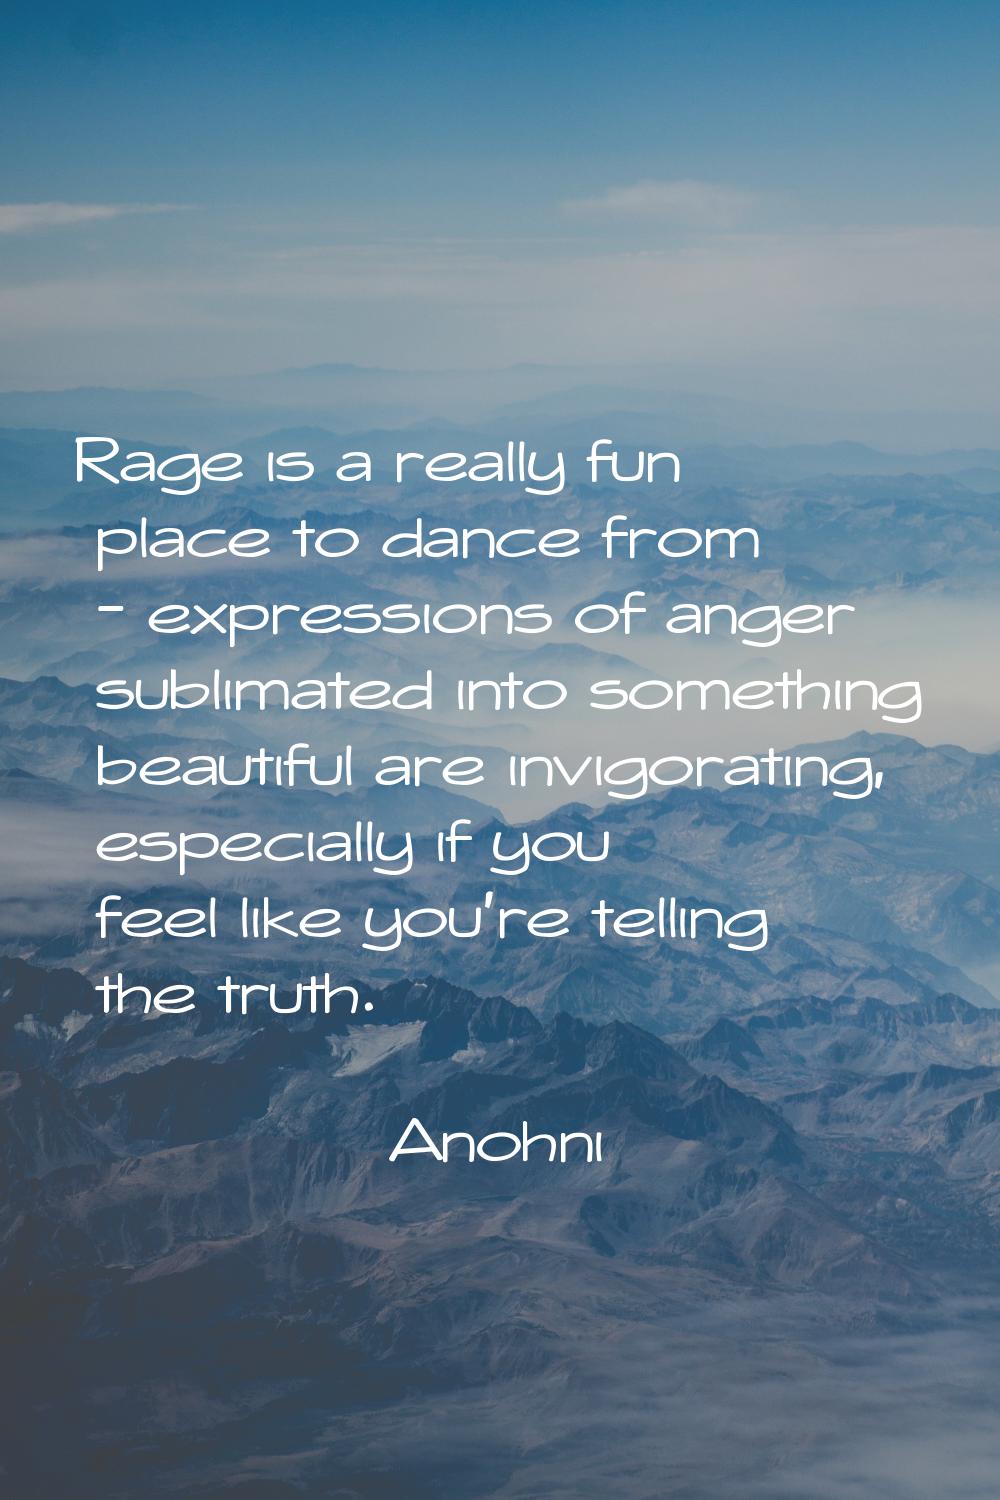 Rage is a really fun place to dance from - expressions of anger sublimated into something beautiful